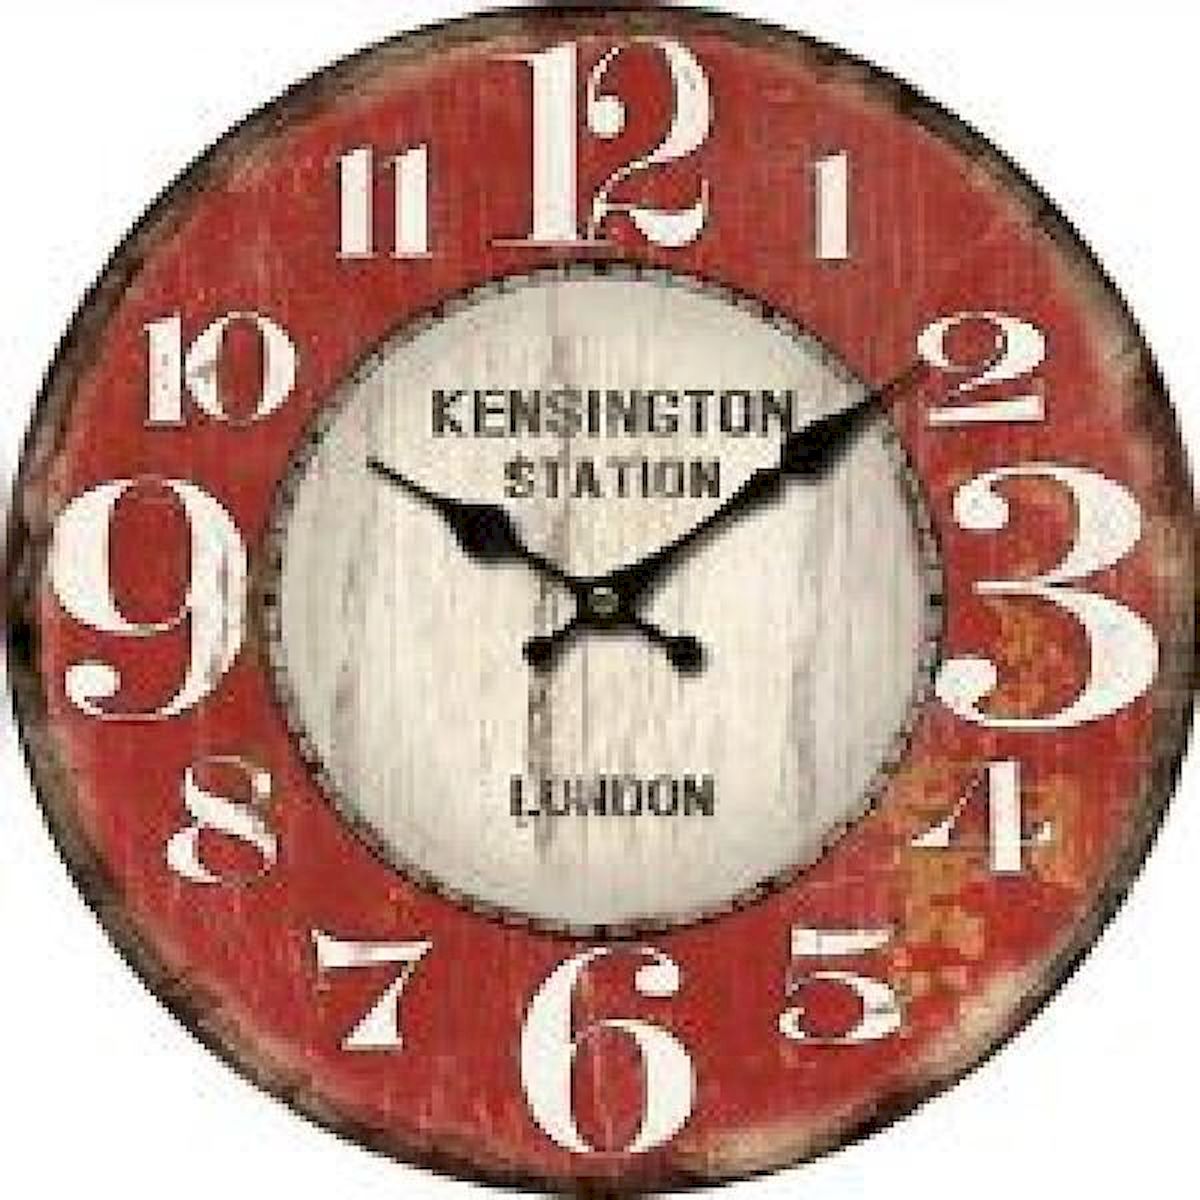 Picture of Forpost FP-MIN-079 Kensington Station London Wall Clock